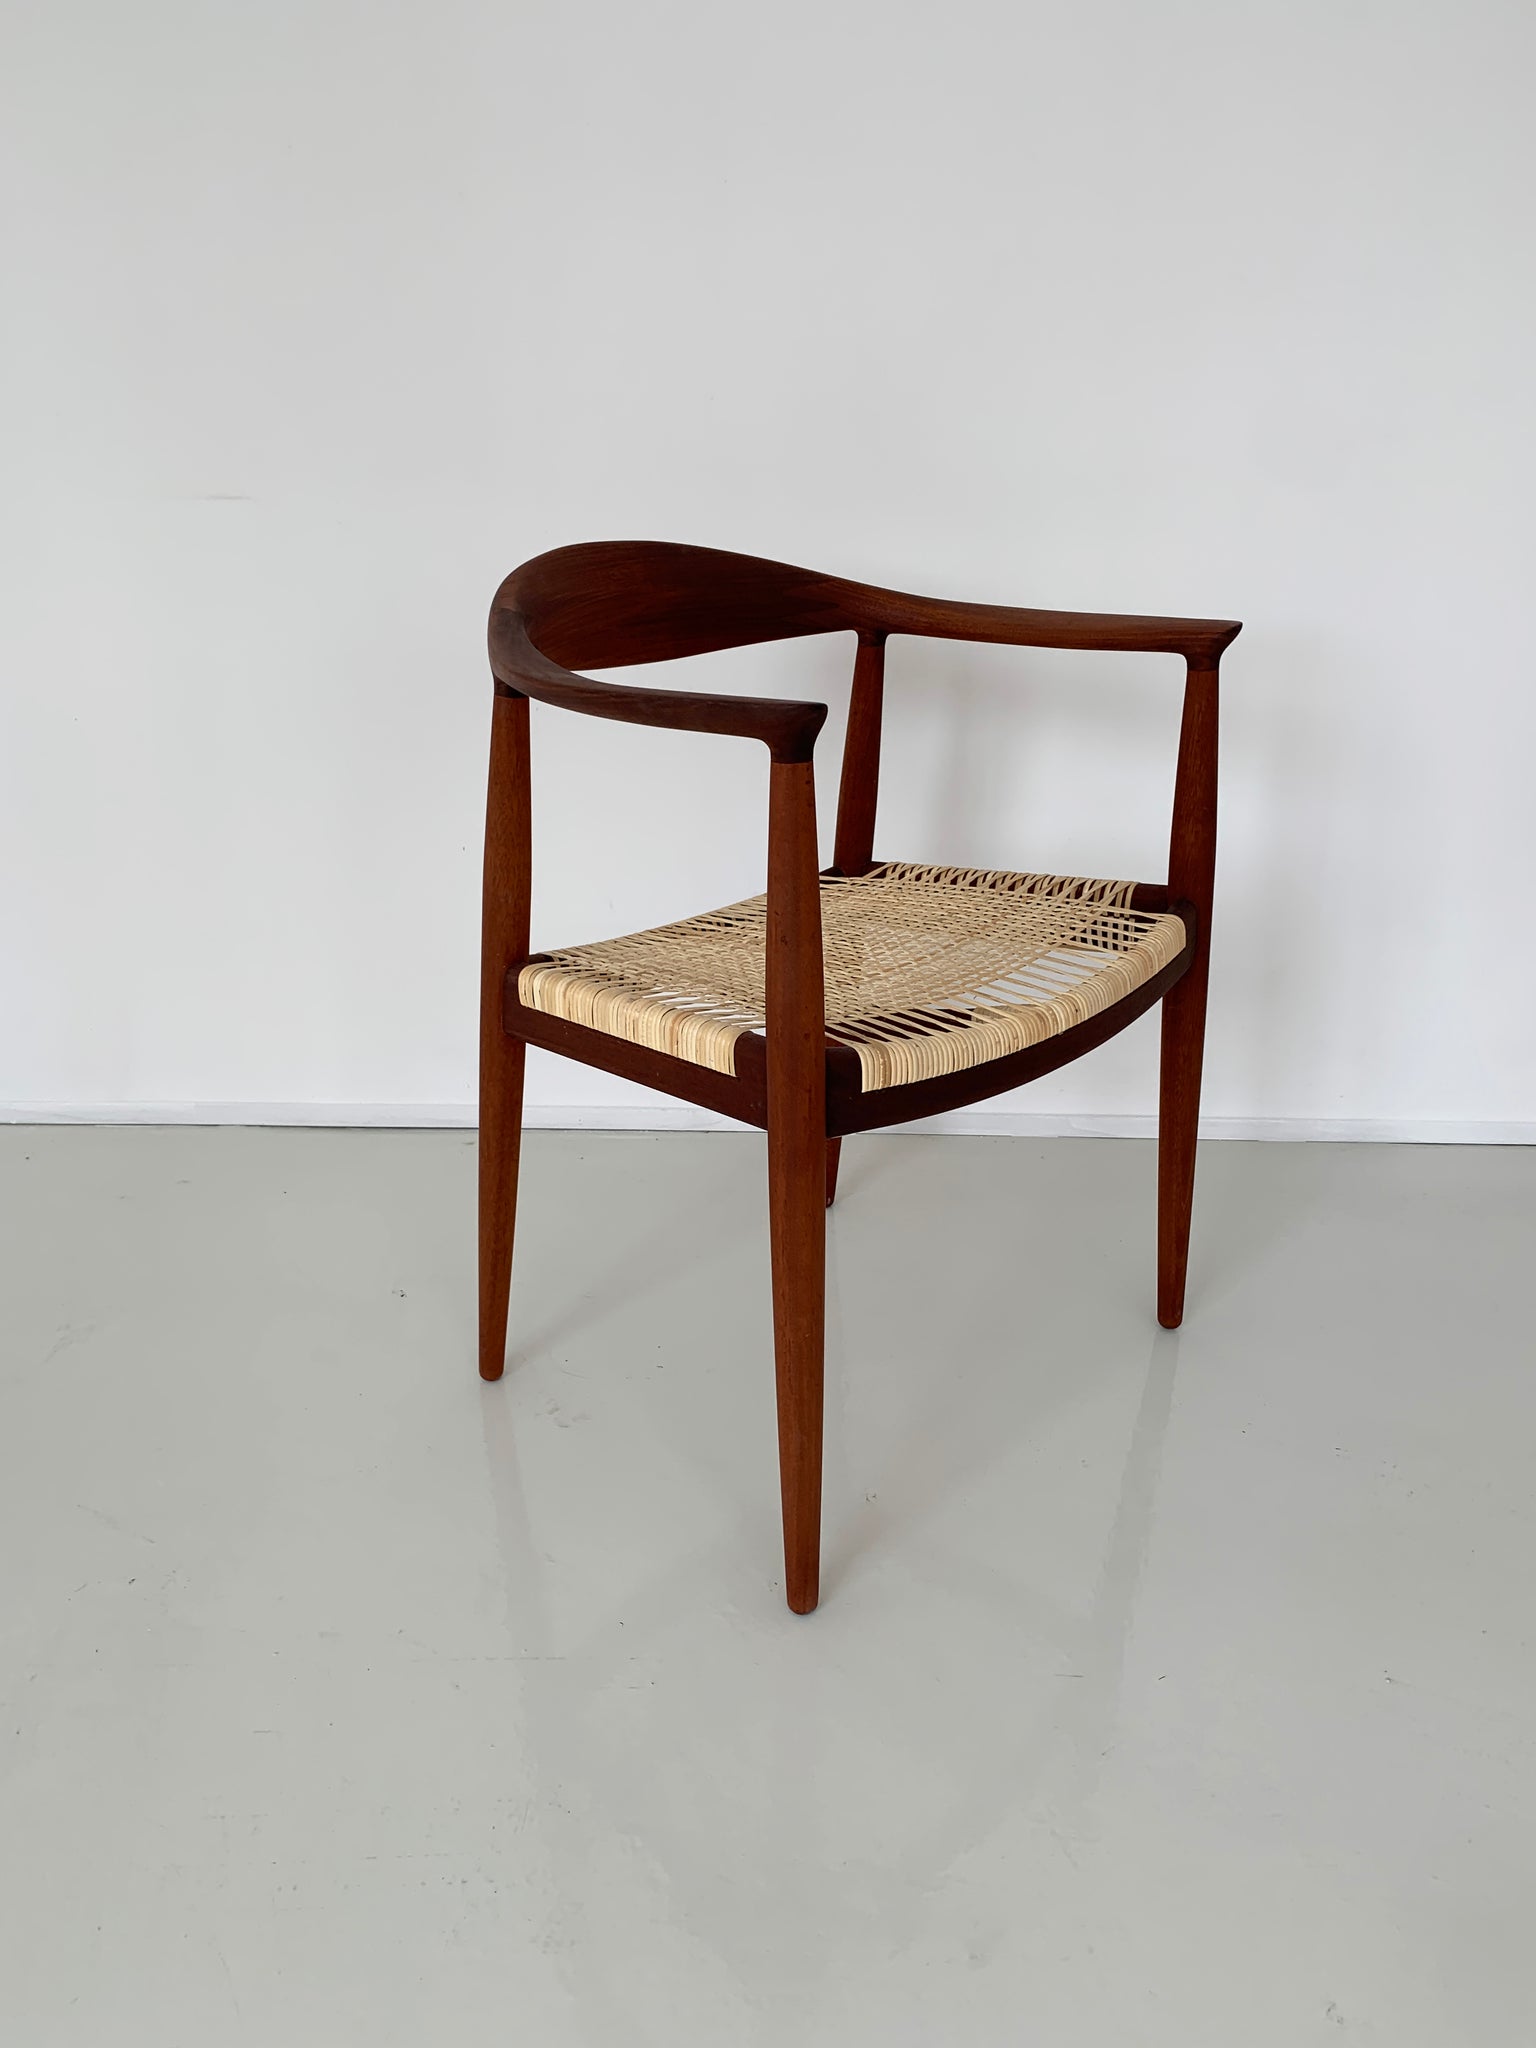 Hans Wegner Round Chairs, PP 501 by PP Mobler